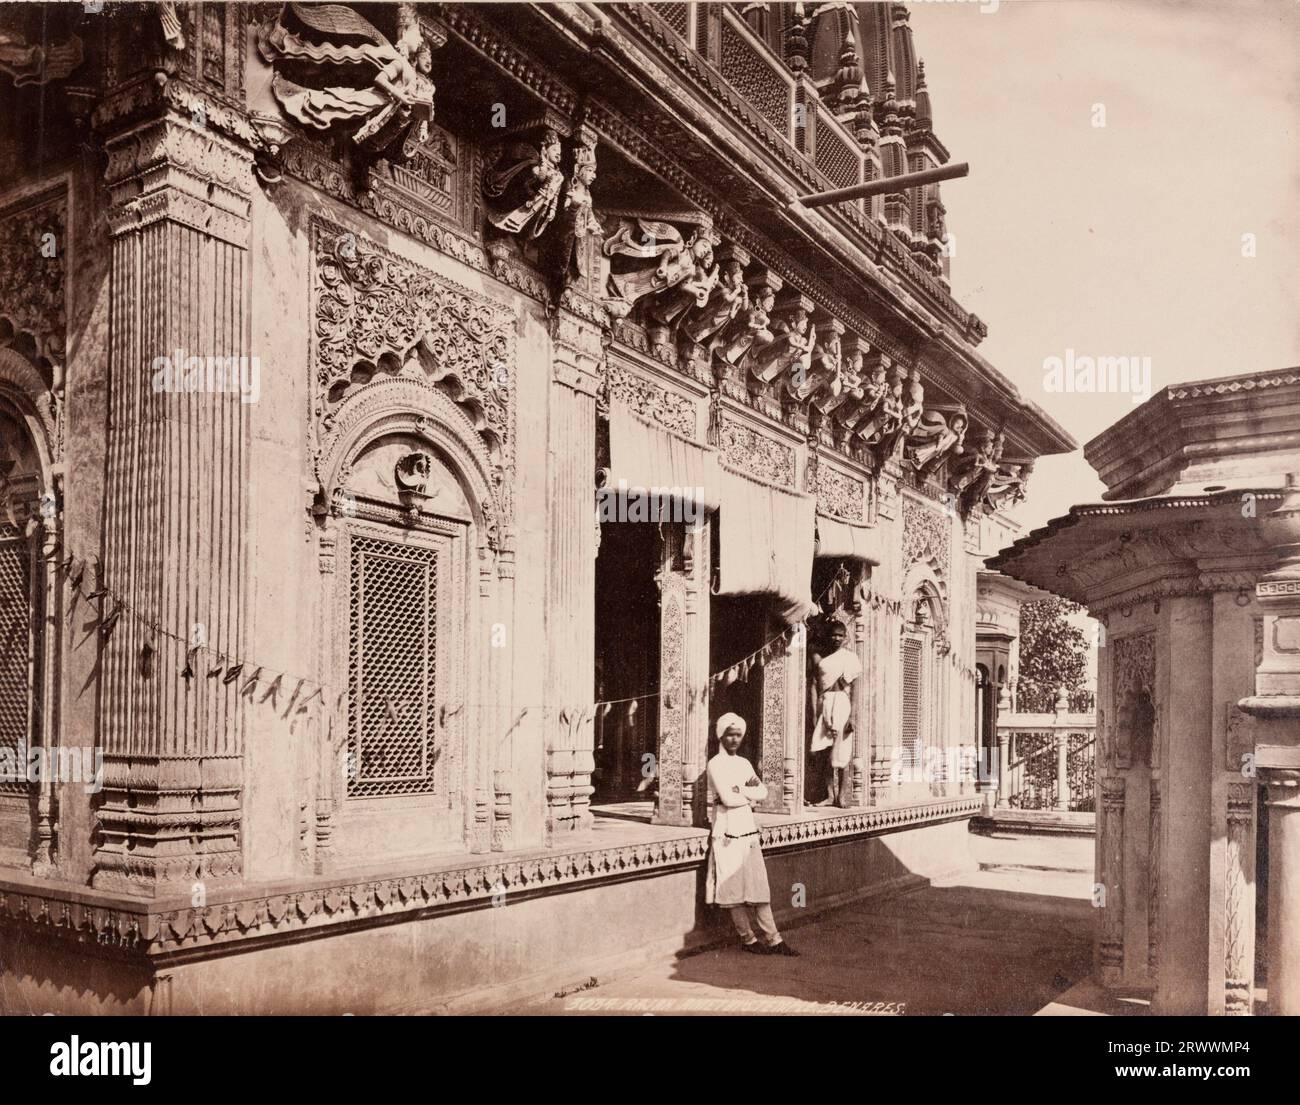 View of the Amethi Shiva Temple on the Manikarnika Ghat in Benares [Varanasi], built by the King of Amethi, Raja Lal Madhav Singh. The exterior walls of the temple are intricately carved and winged figures on the brackets supporting the second floor can be seen. A string of dry mango leaves is hung outside the entrance. Two Indian men in white traditional dress rest against the walls outside. Inscribed on negative: Frith's Series. 3034 Rajah Amethi's Temple Benares. Caption reads: Rajah Amethi's Temple, Benares. Stock Photo